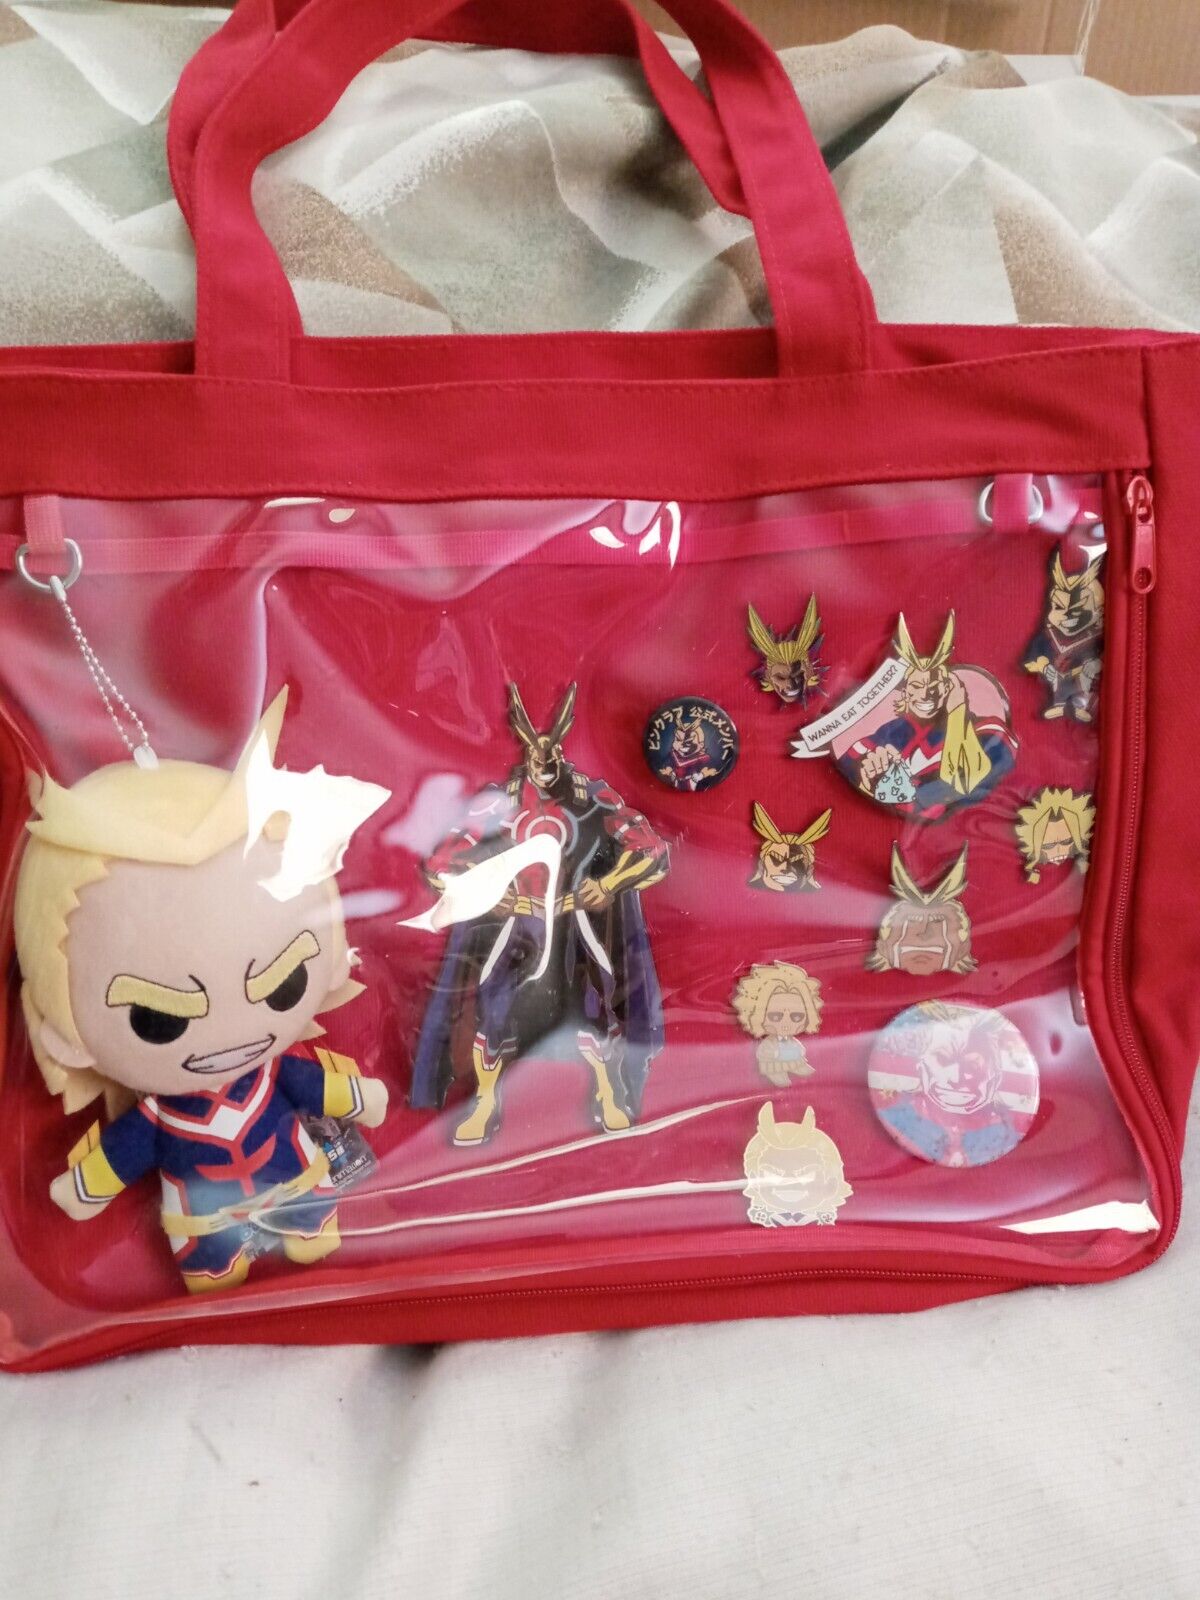 SUPER RARE COLLECTOR ITEM MY HERO ACADEMIA RED TOTE BAG + COLLECTOR PINS DISPLAY